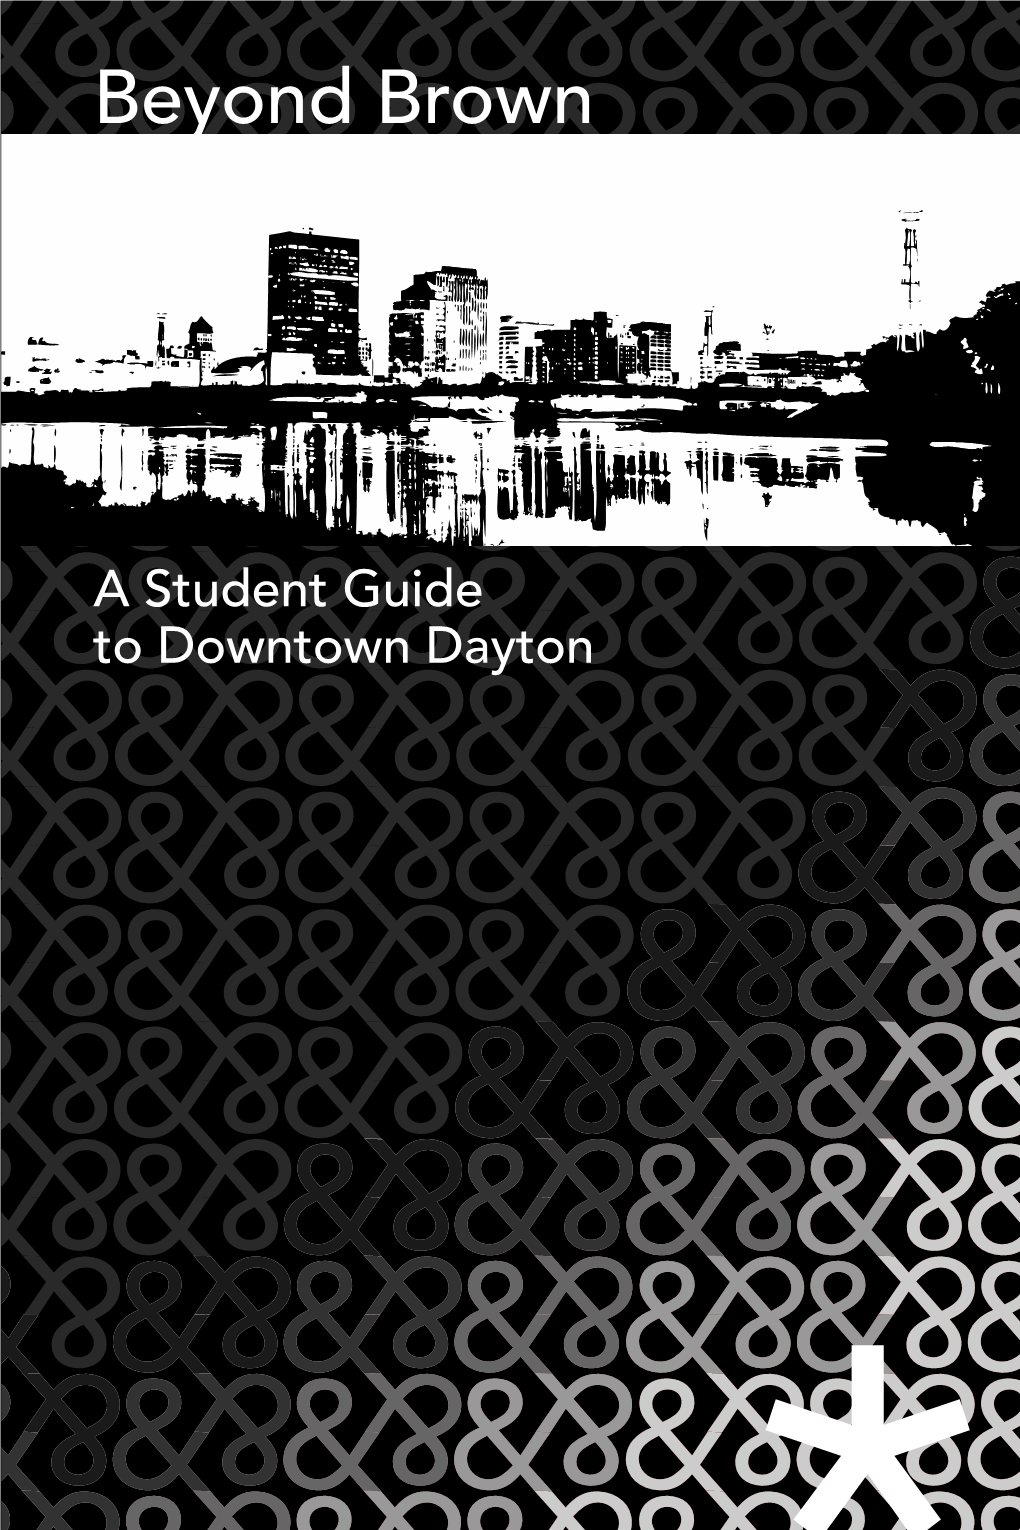 Beyond Brown Street, a Student Guide to Downtown Dayton